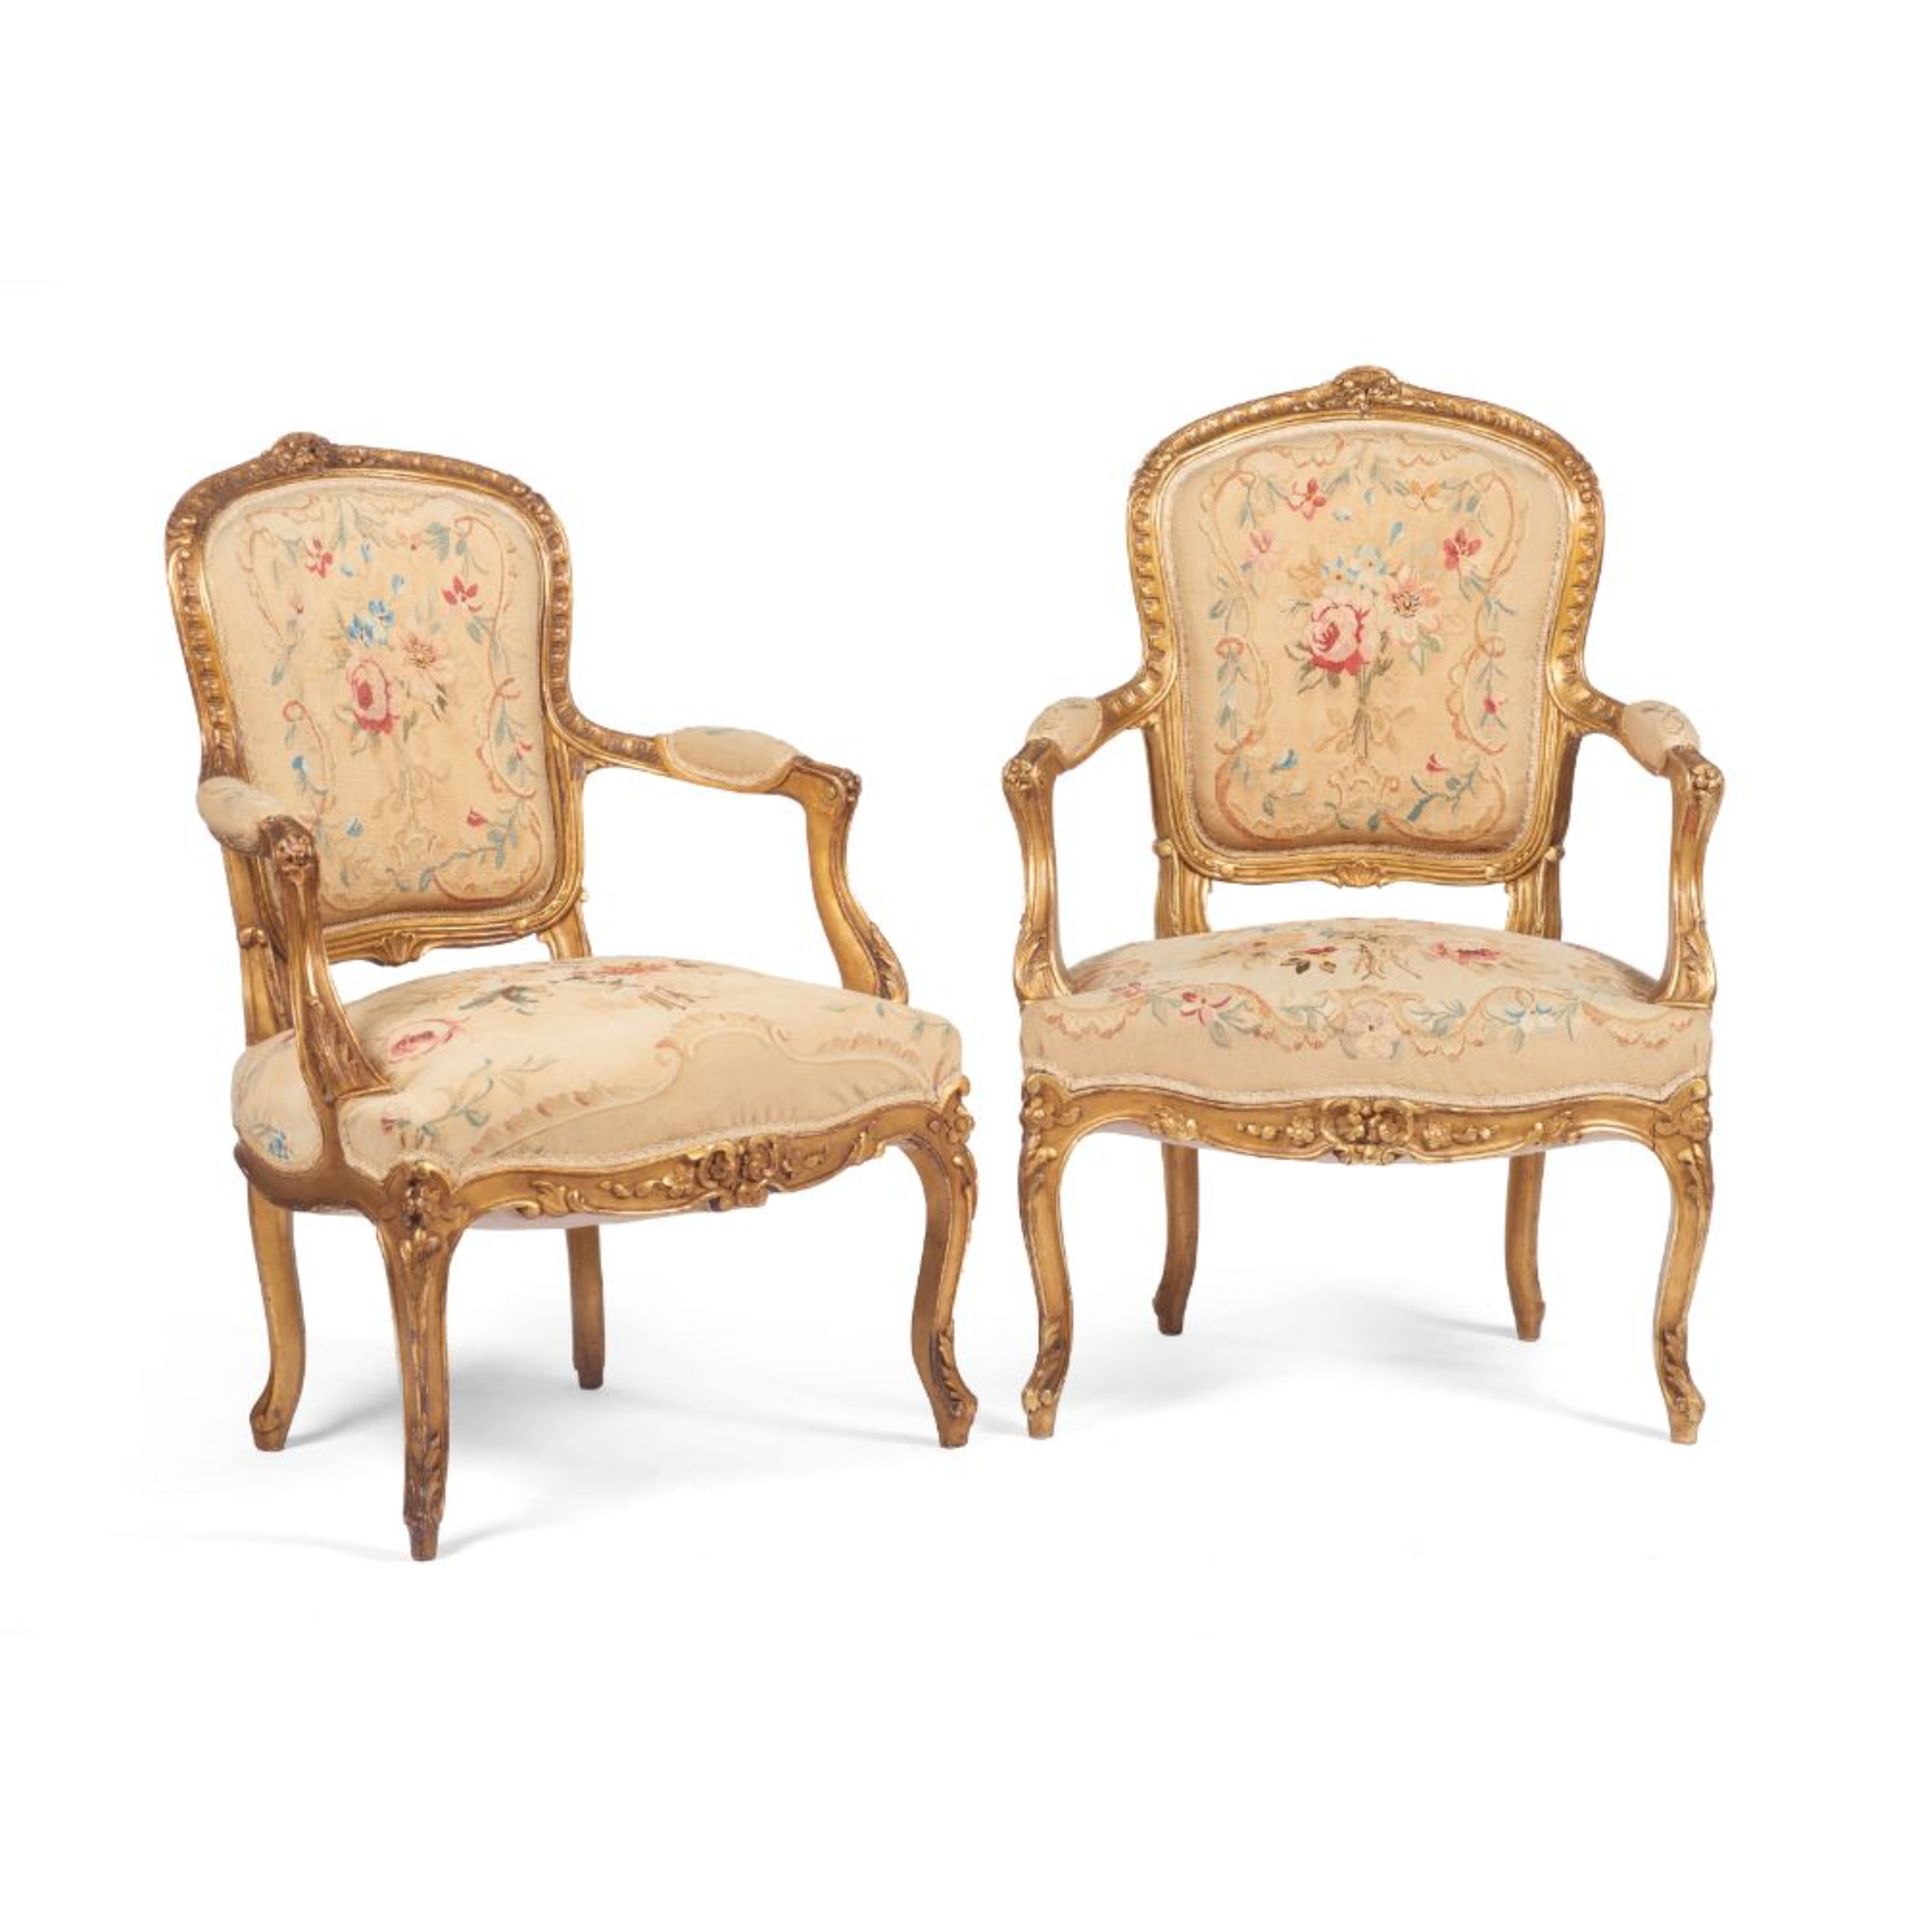 A pair of Louis XV style fauteuils, Carved and gilt wood, Floral and foliage motifs tapestry